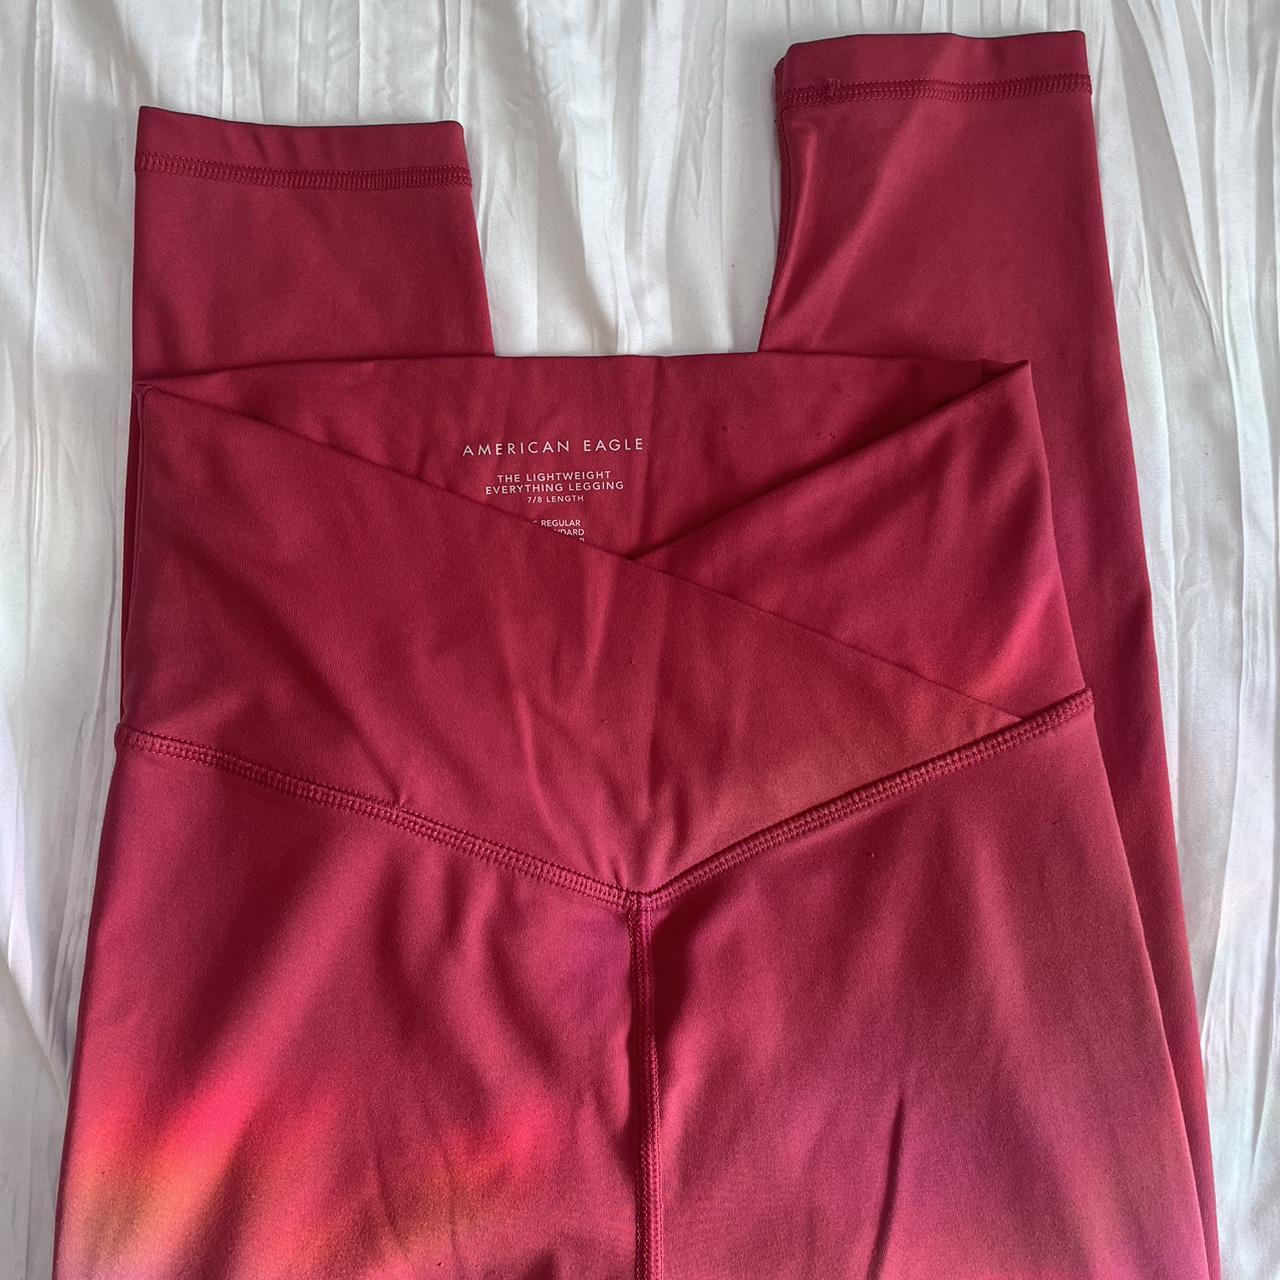 American Eagle Crossover 'Lightweight Everything Leggings' 7/8